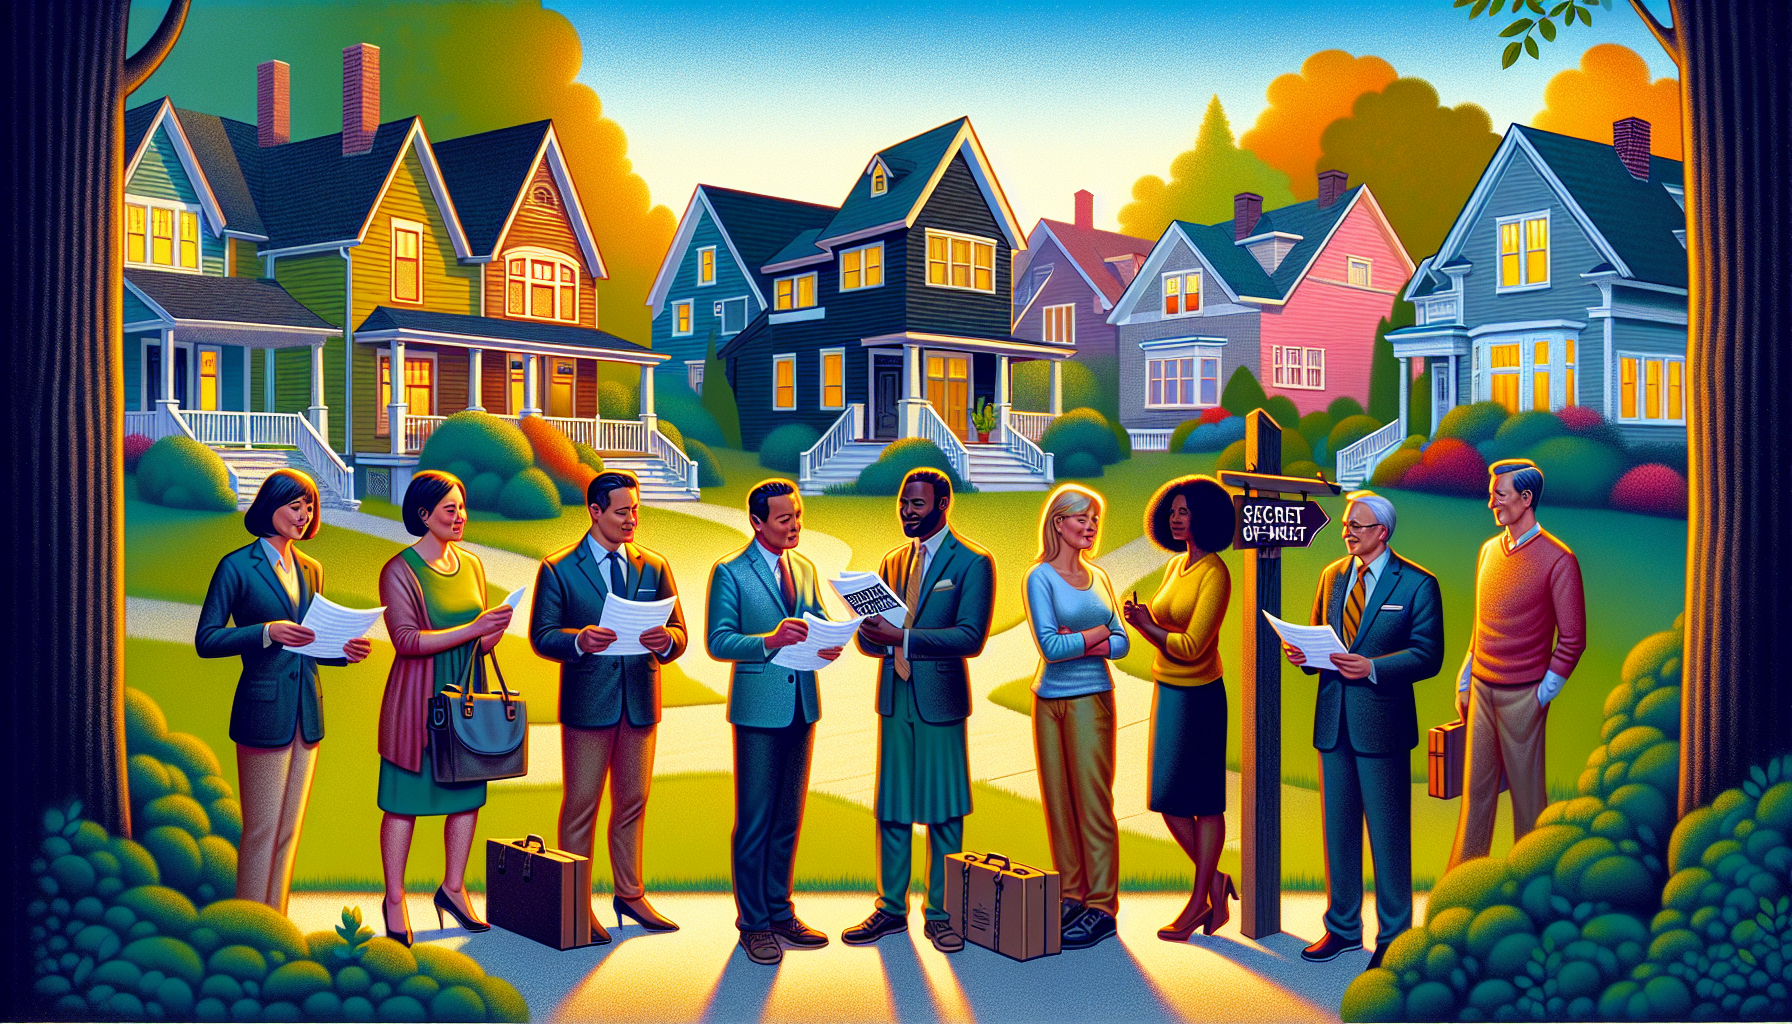 Create an image depicting a charming suburban neighborhood in Birmingham, Michigan, with a mix of quaint and modern homes. In the foreground, illustrate a group of individuals holding a discreet meeti